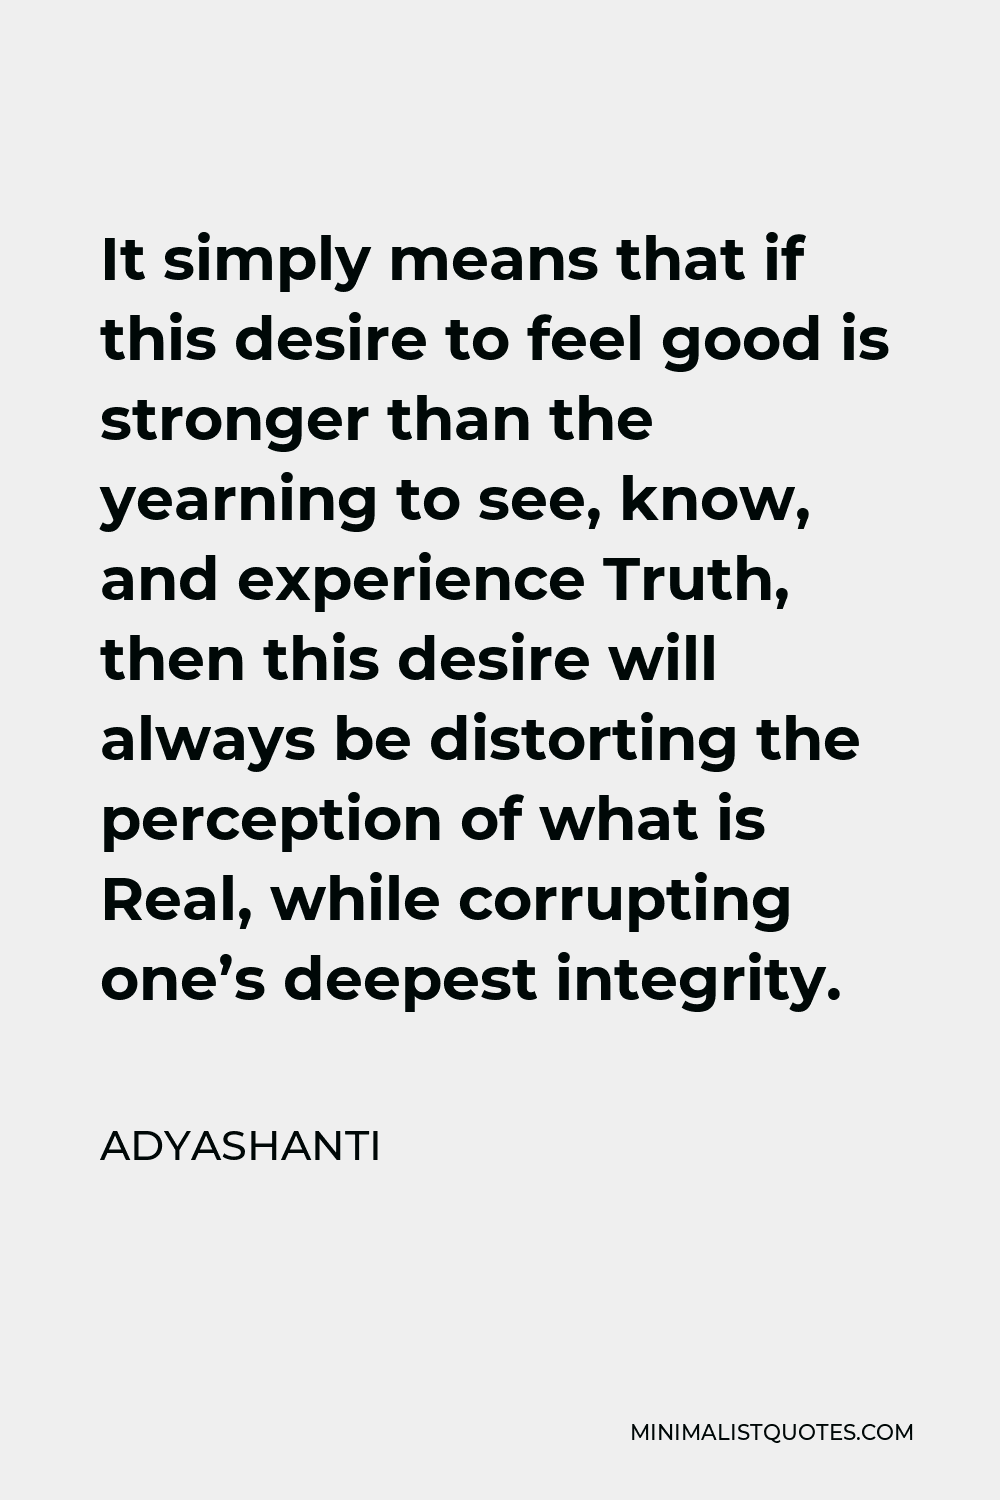 Adyashanti Quote - It simply means that if this desire to feel good is stronger than the yearning to see, know, and experience Truth, then this desire will always be distorting the perception of what is Real, while corrupting one’s deepest integrity.